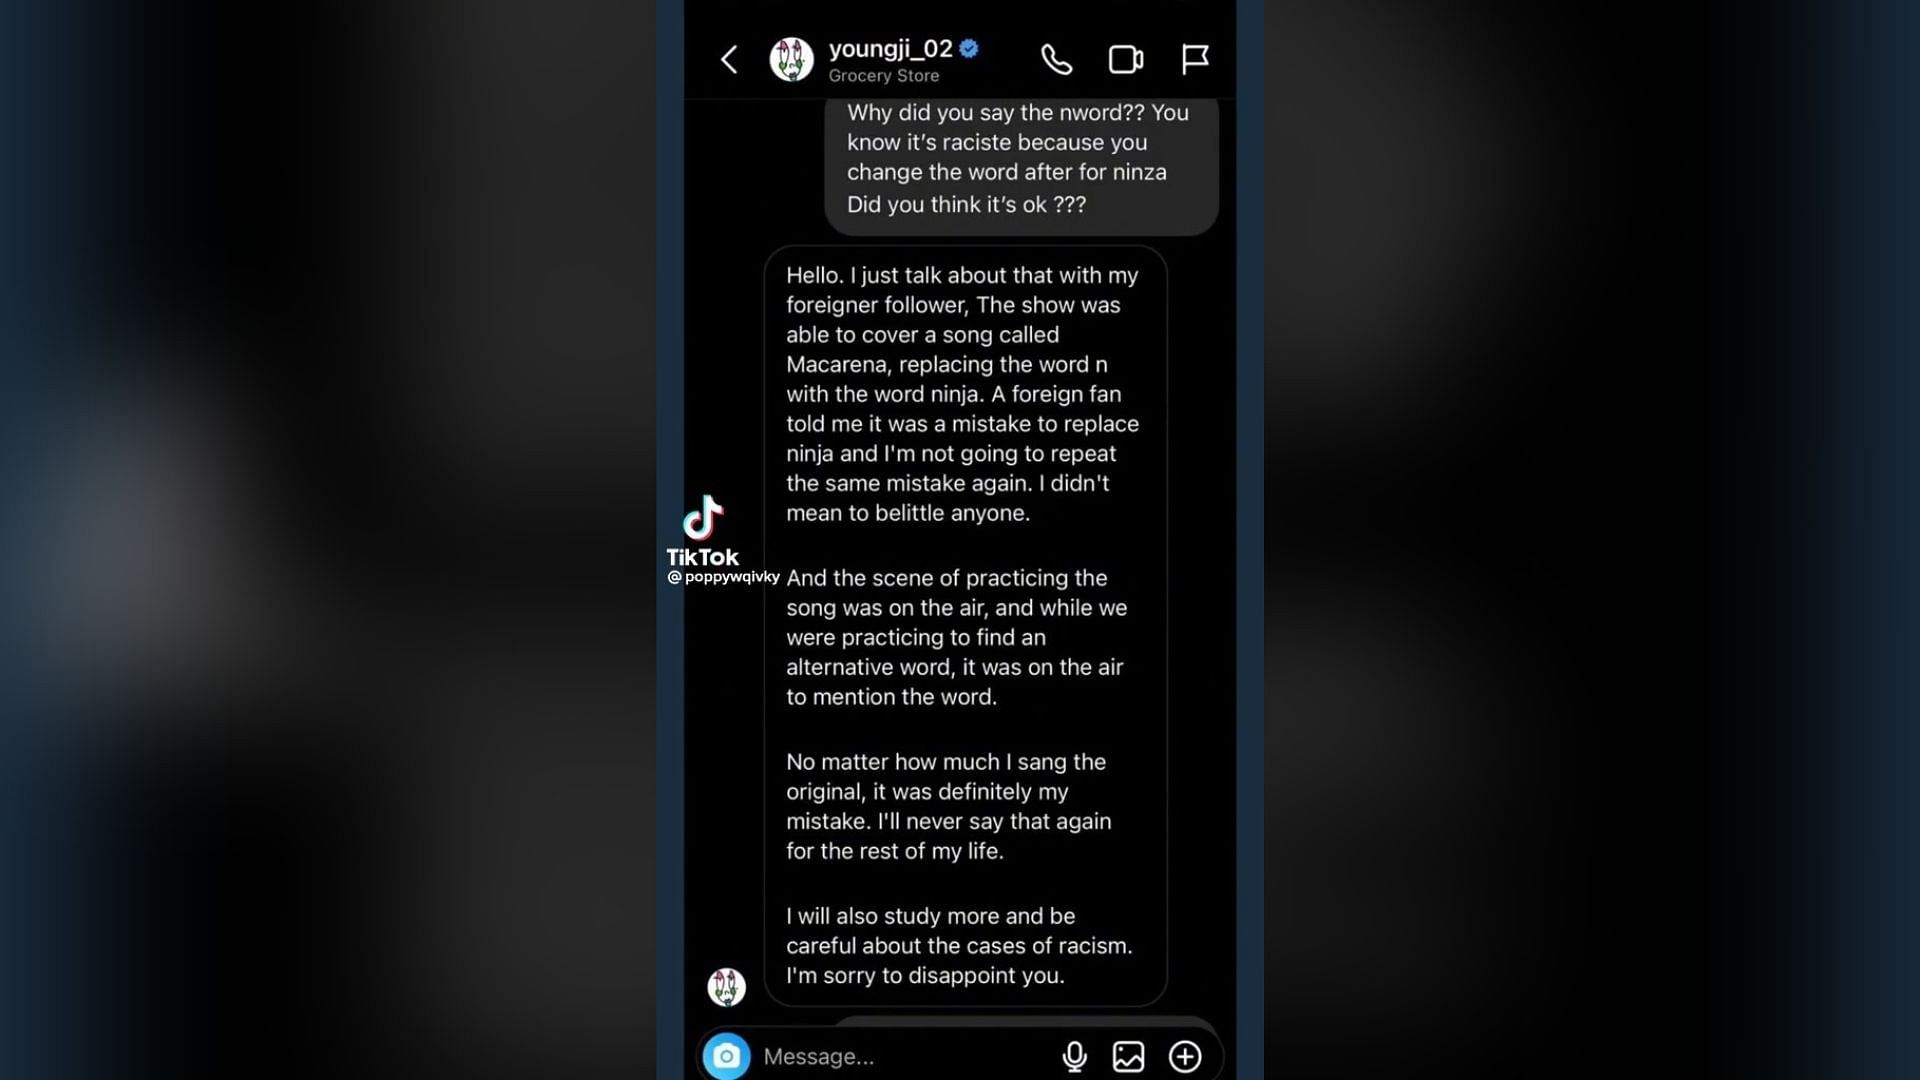 The rapper&#039;s apology for using the N-word in the past (Image via TikTok/poppywqicky)